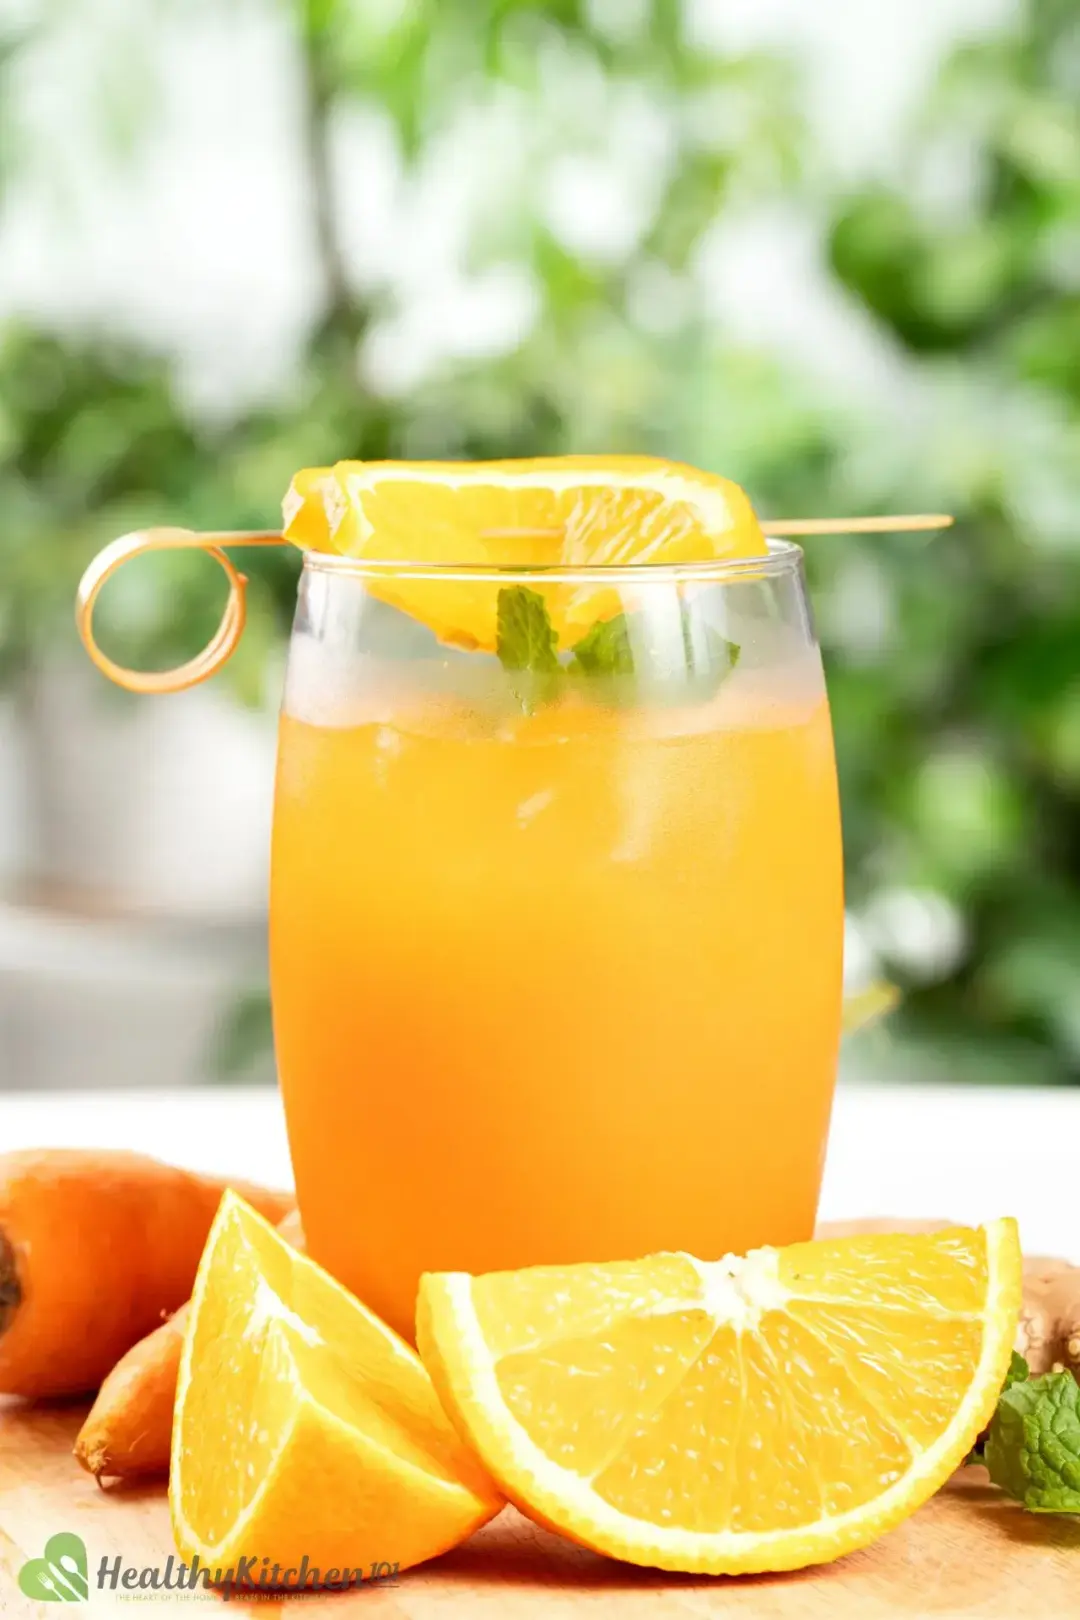 A glass of orange carrot juice garnished with orange wedges and carrots, with a blurred greeneries background